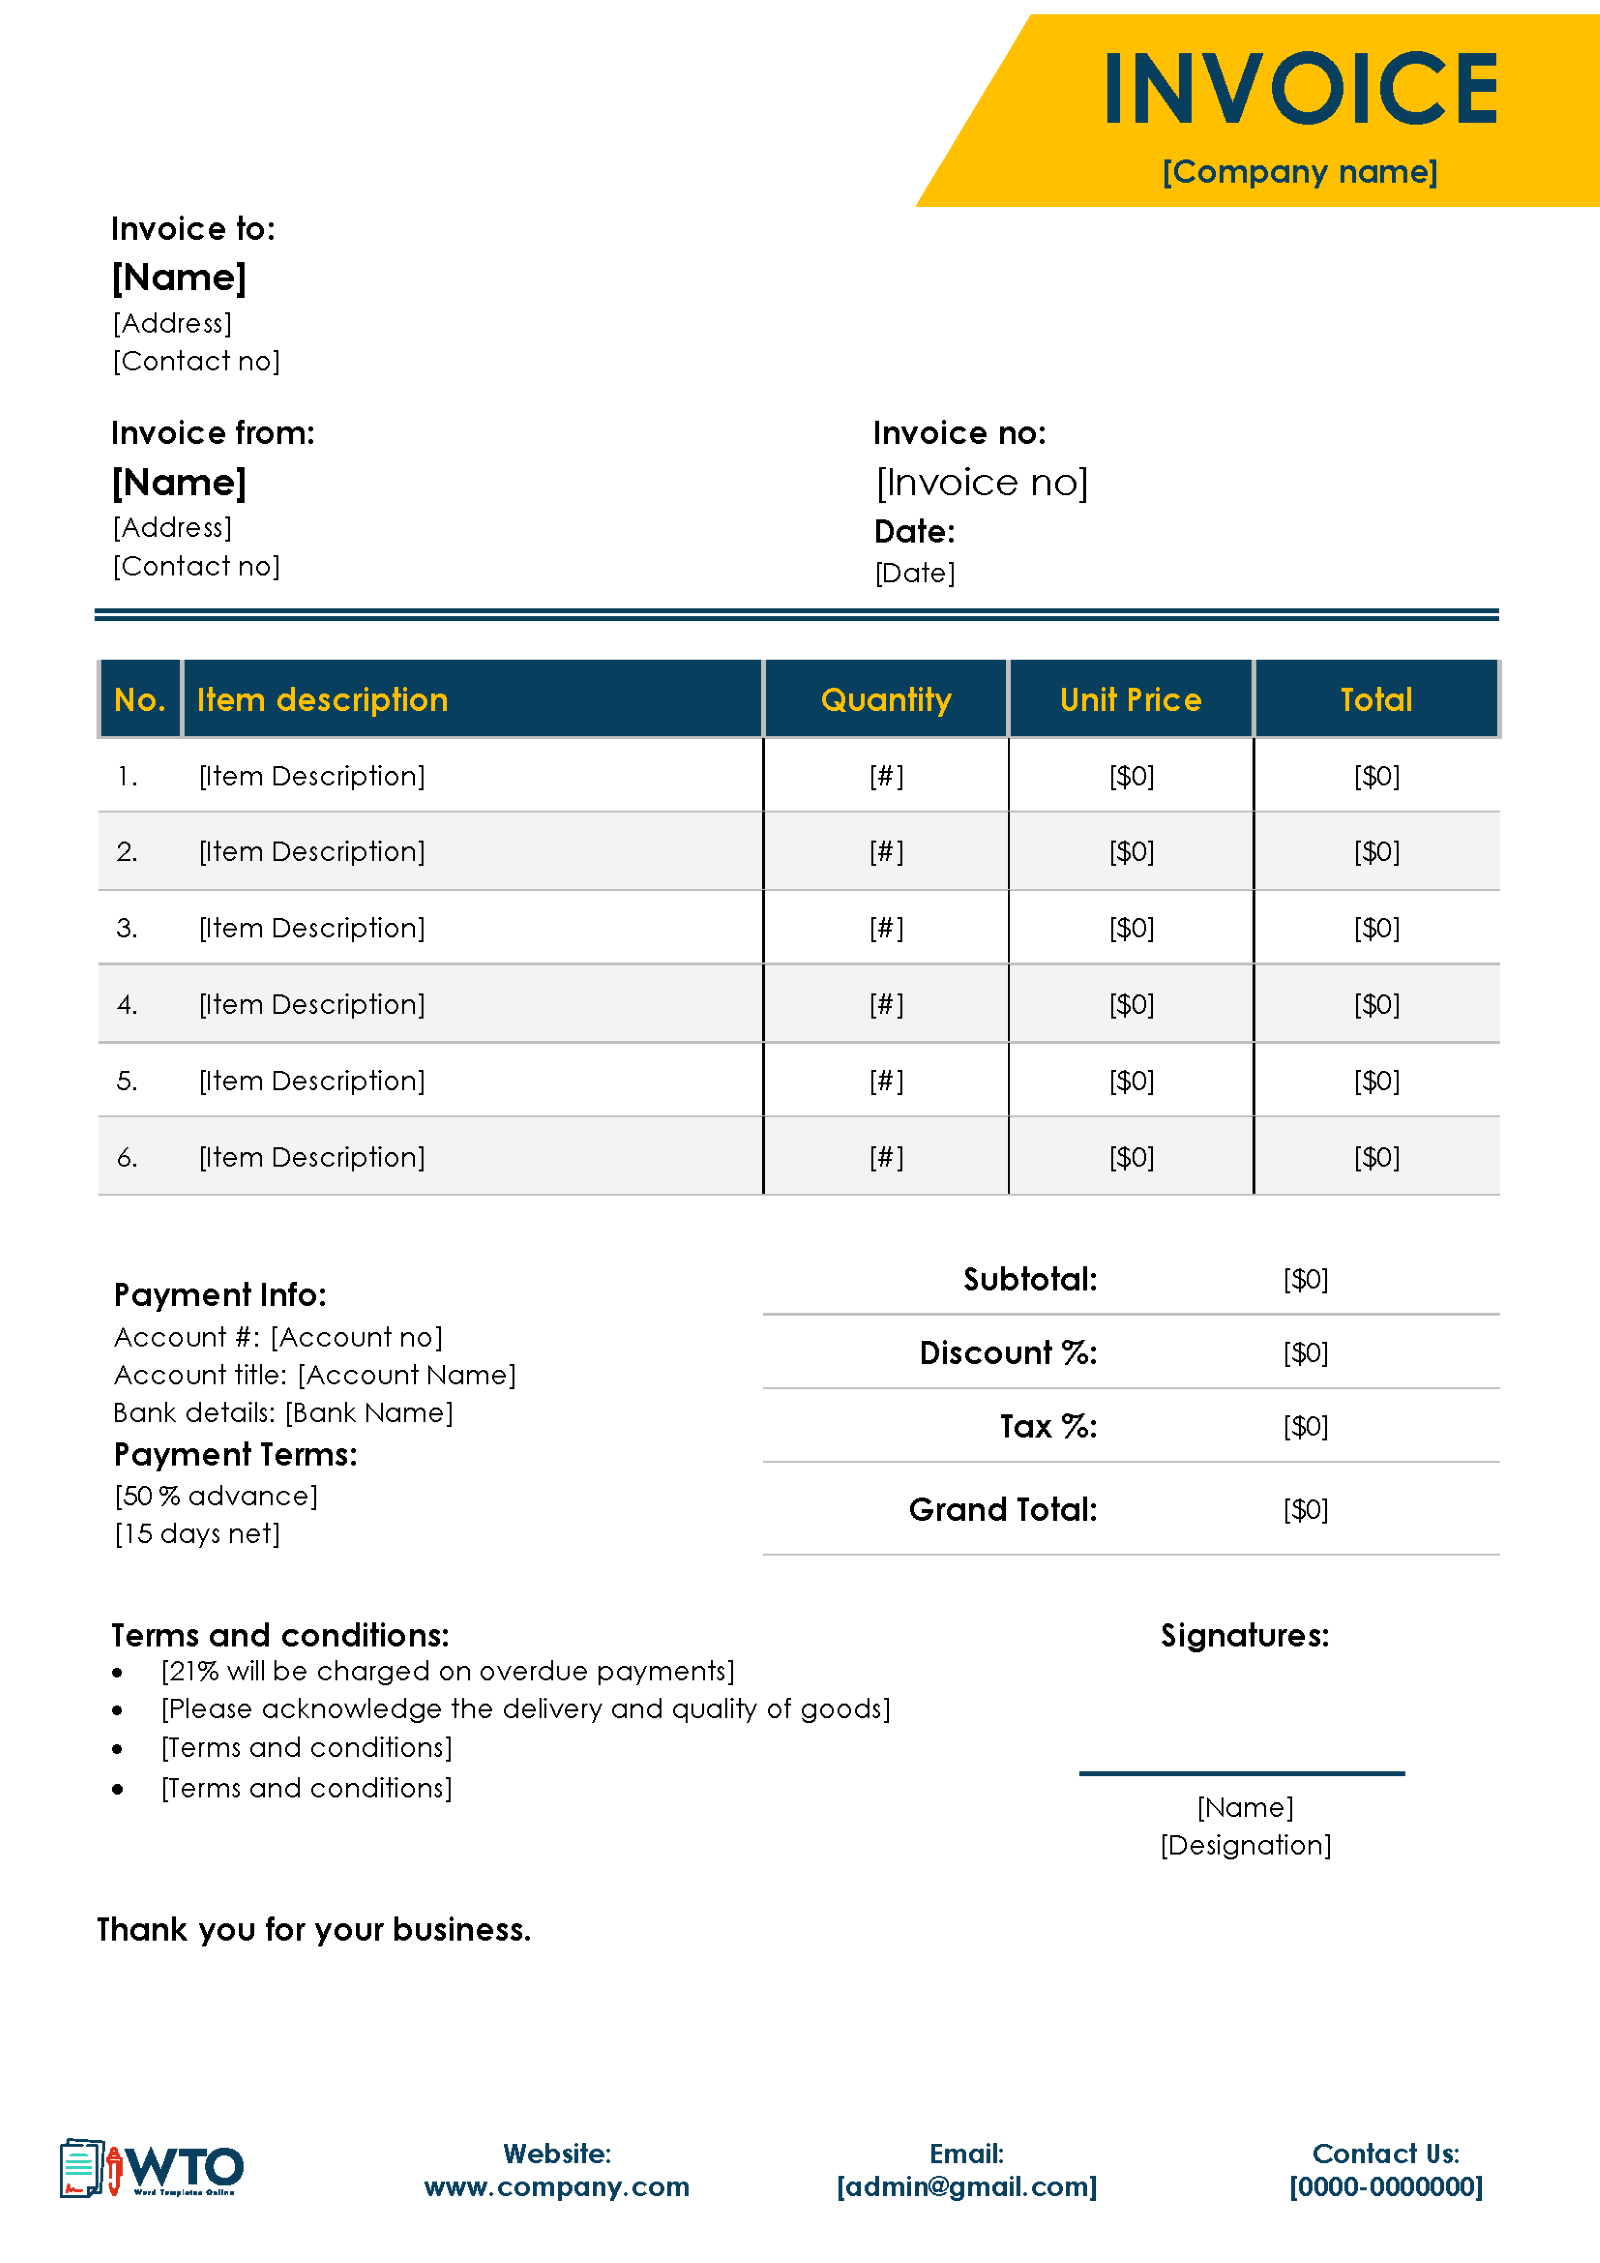 Professional Construction Invoice Example - Free Template